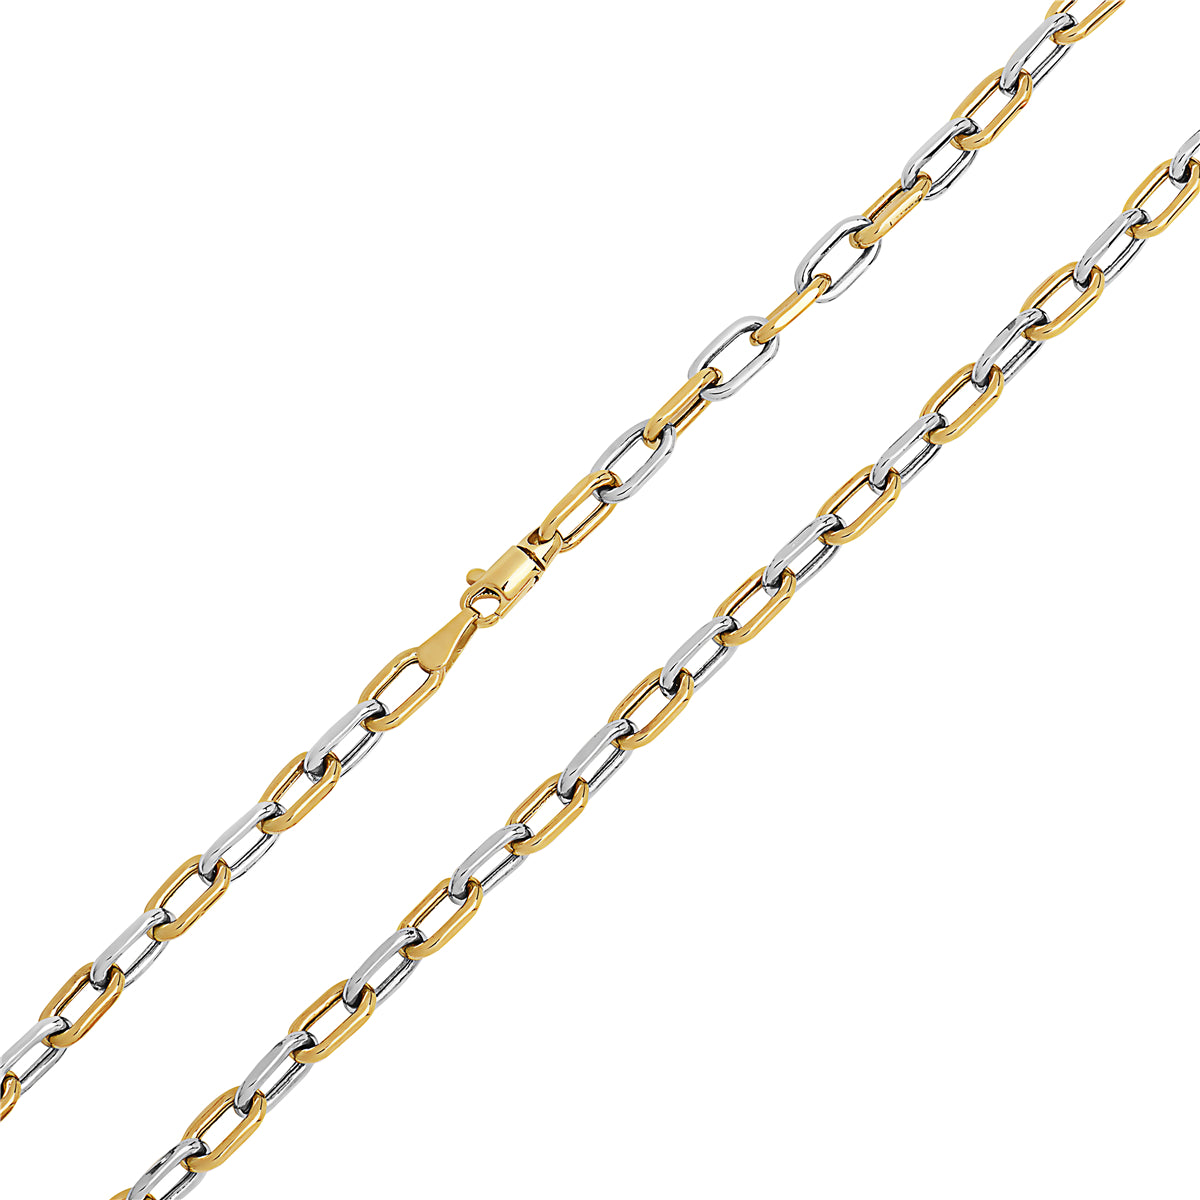 10K Gold Anchor Chain Necklace